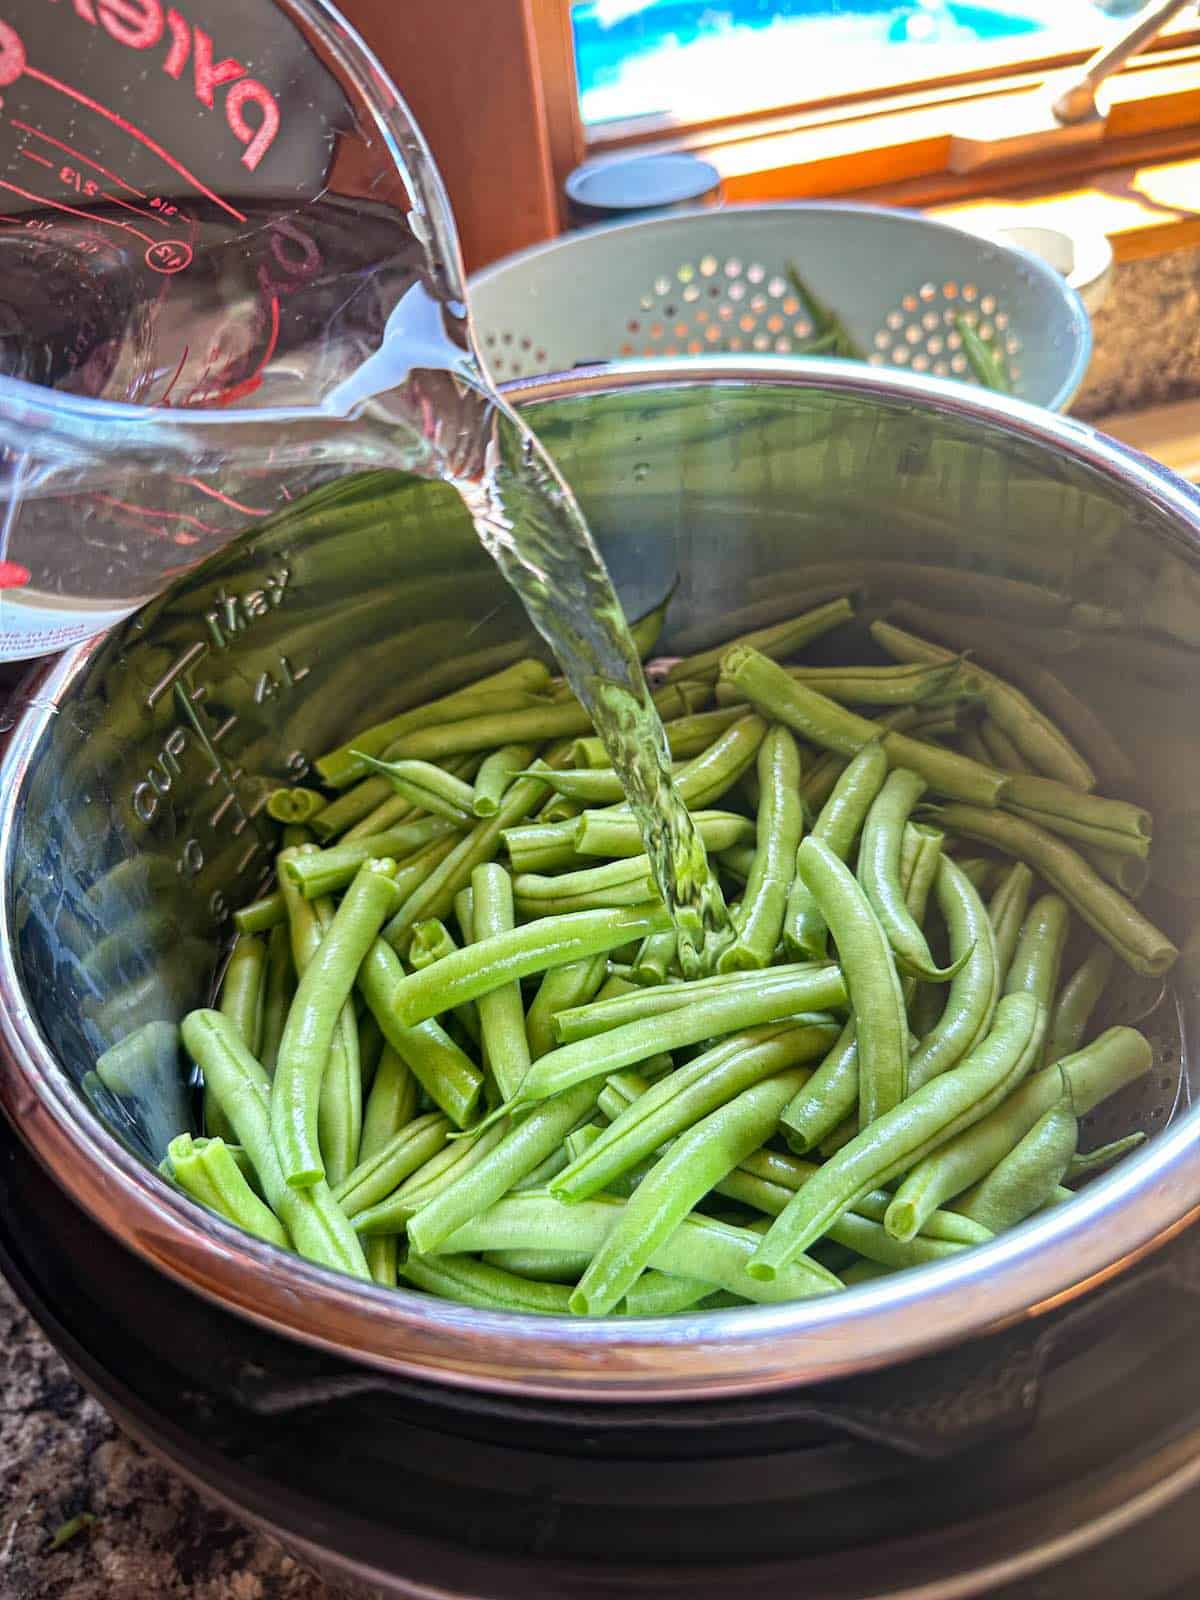 Water being poured onto a pot of trimmed green beans.